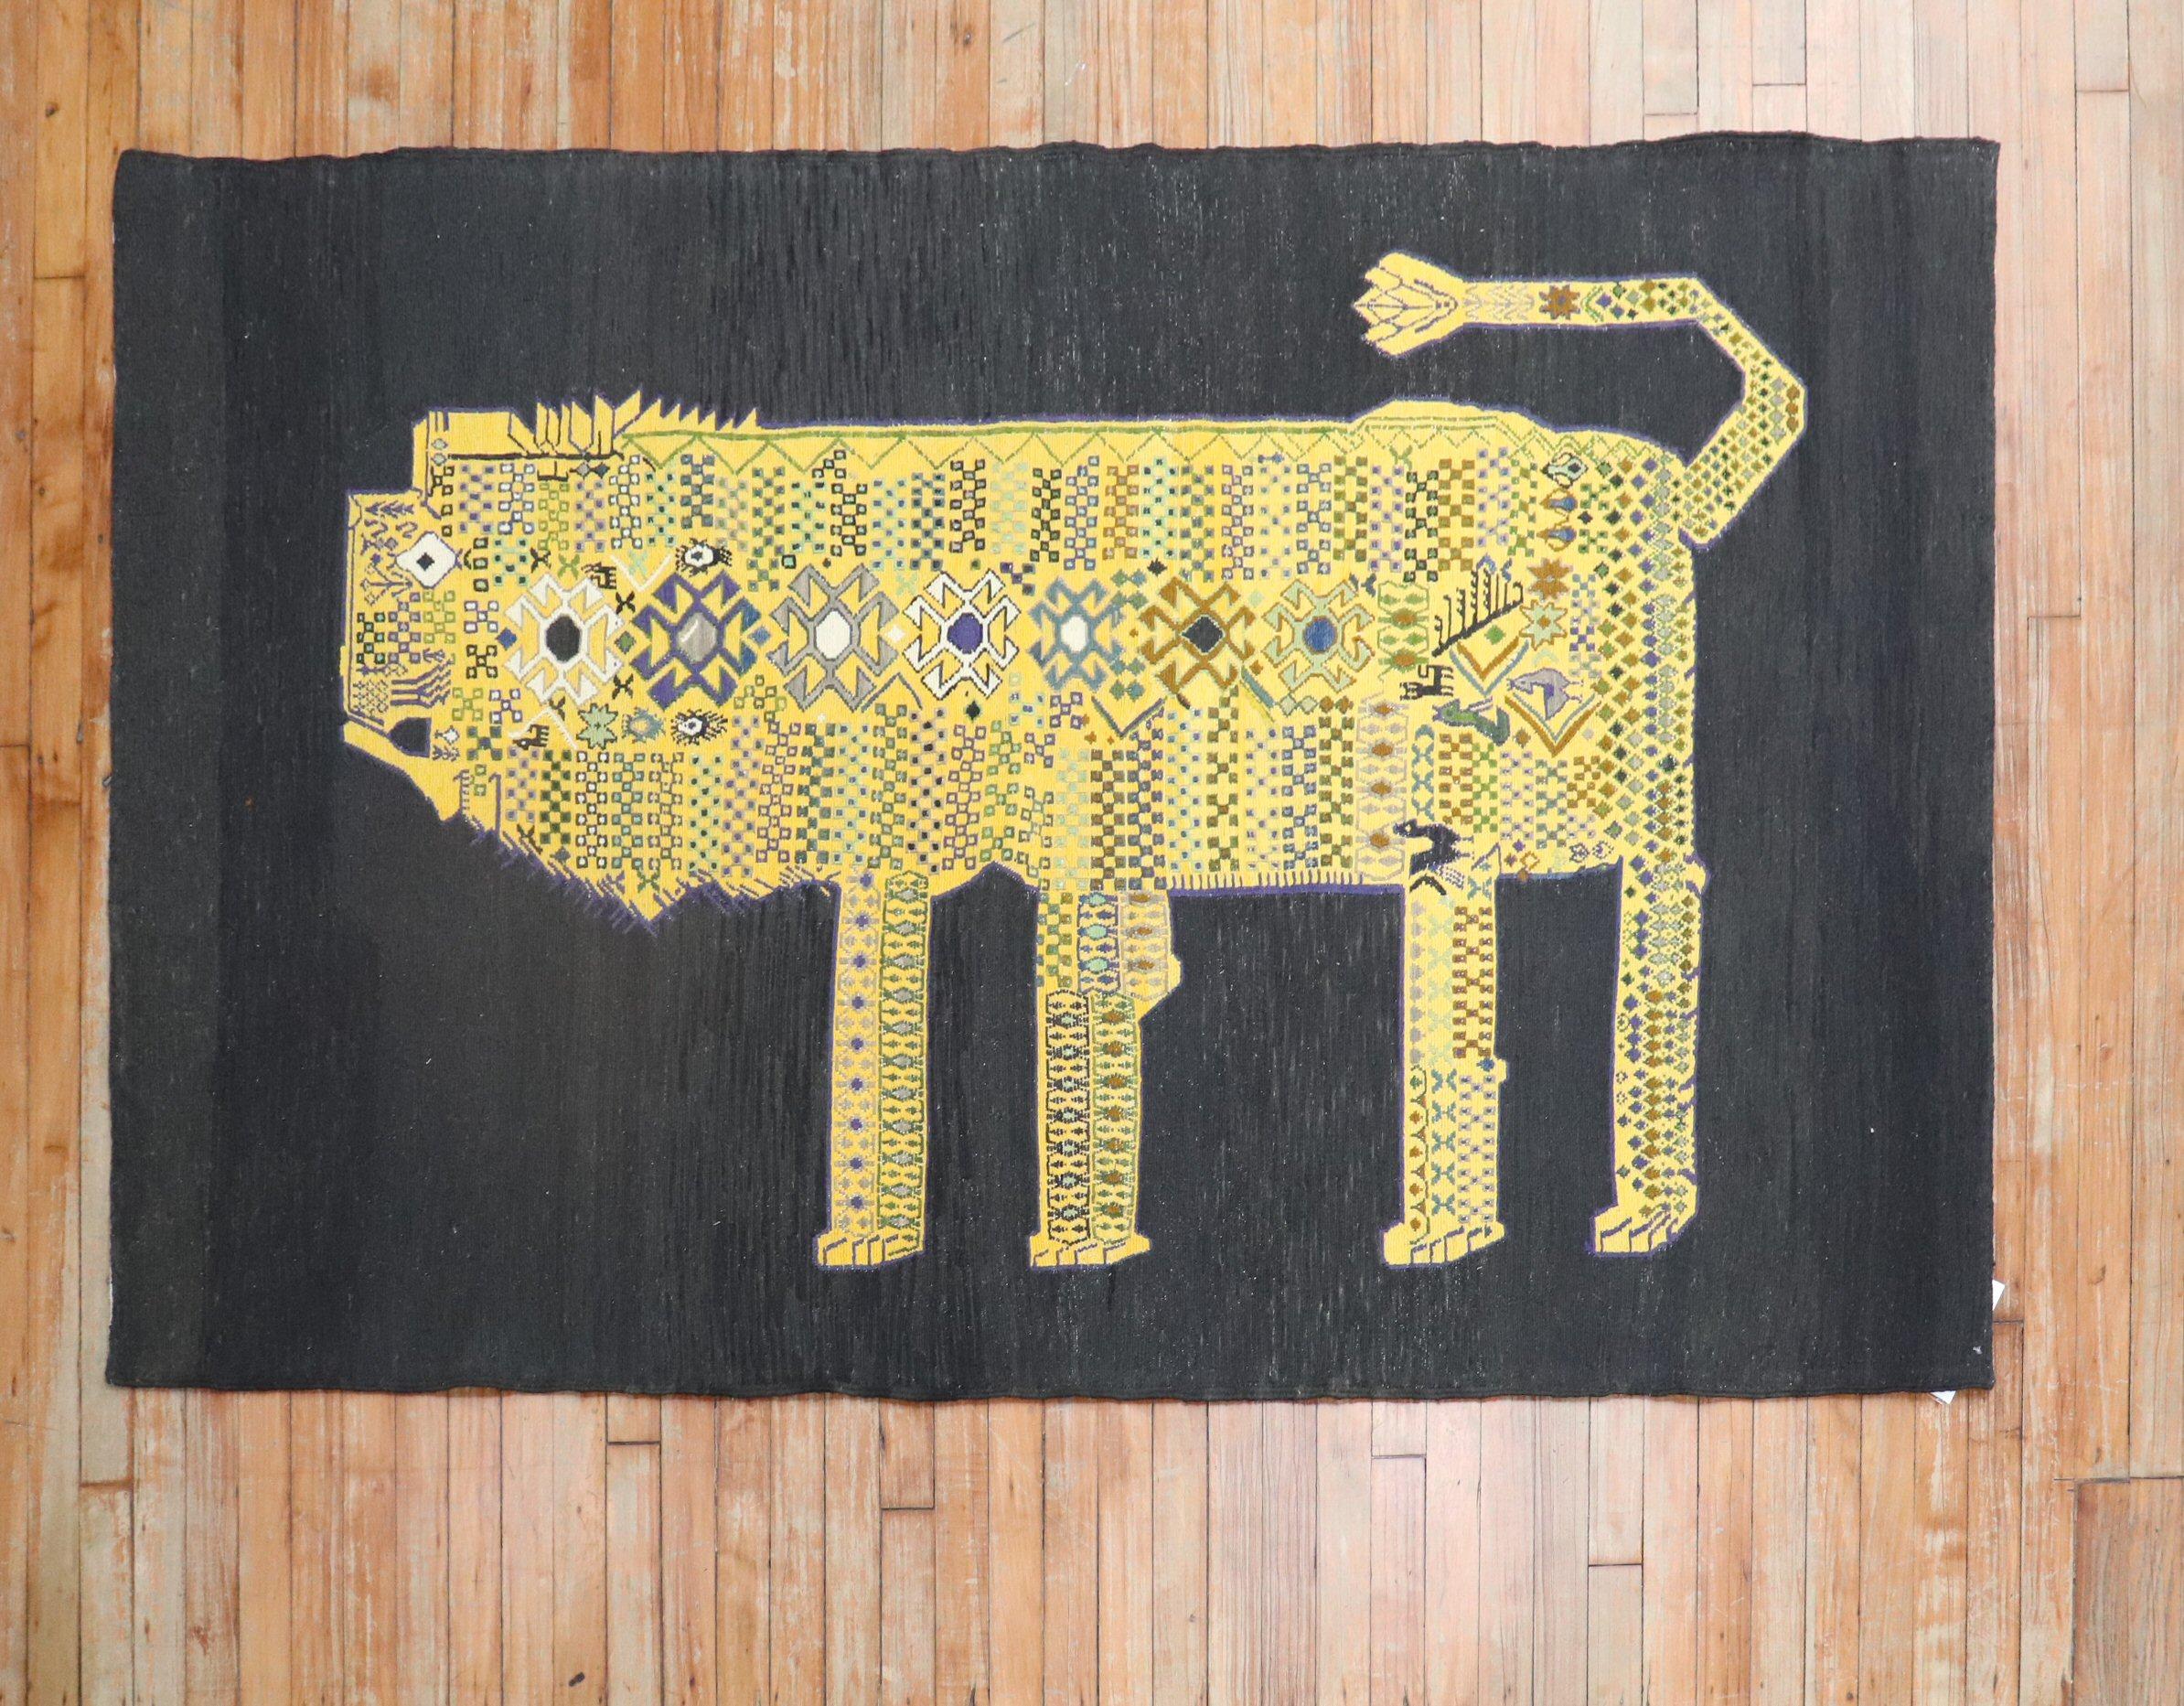 Accent size Persian Kilim from the late 20th century with a yellow lion featuring abstract elements with a gorilla face sitting on a black ground

Measures: 4'2'' x 6'8''

This was originally belonging to a private Persian collector who